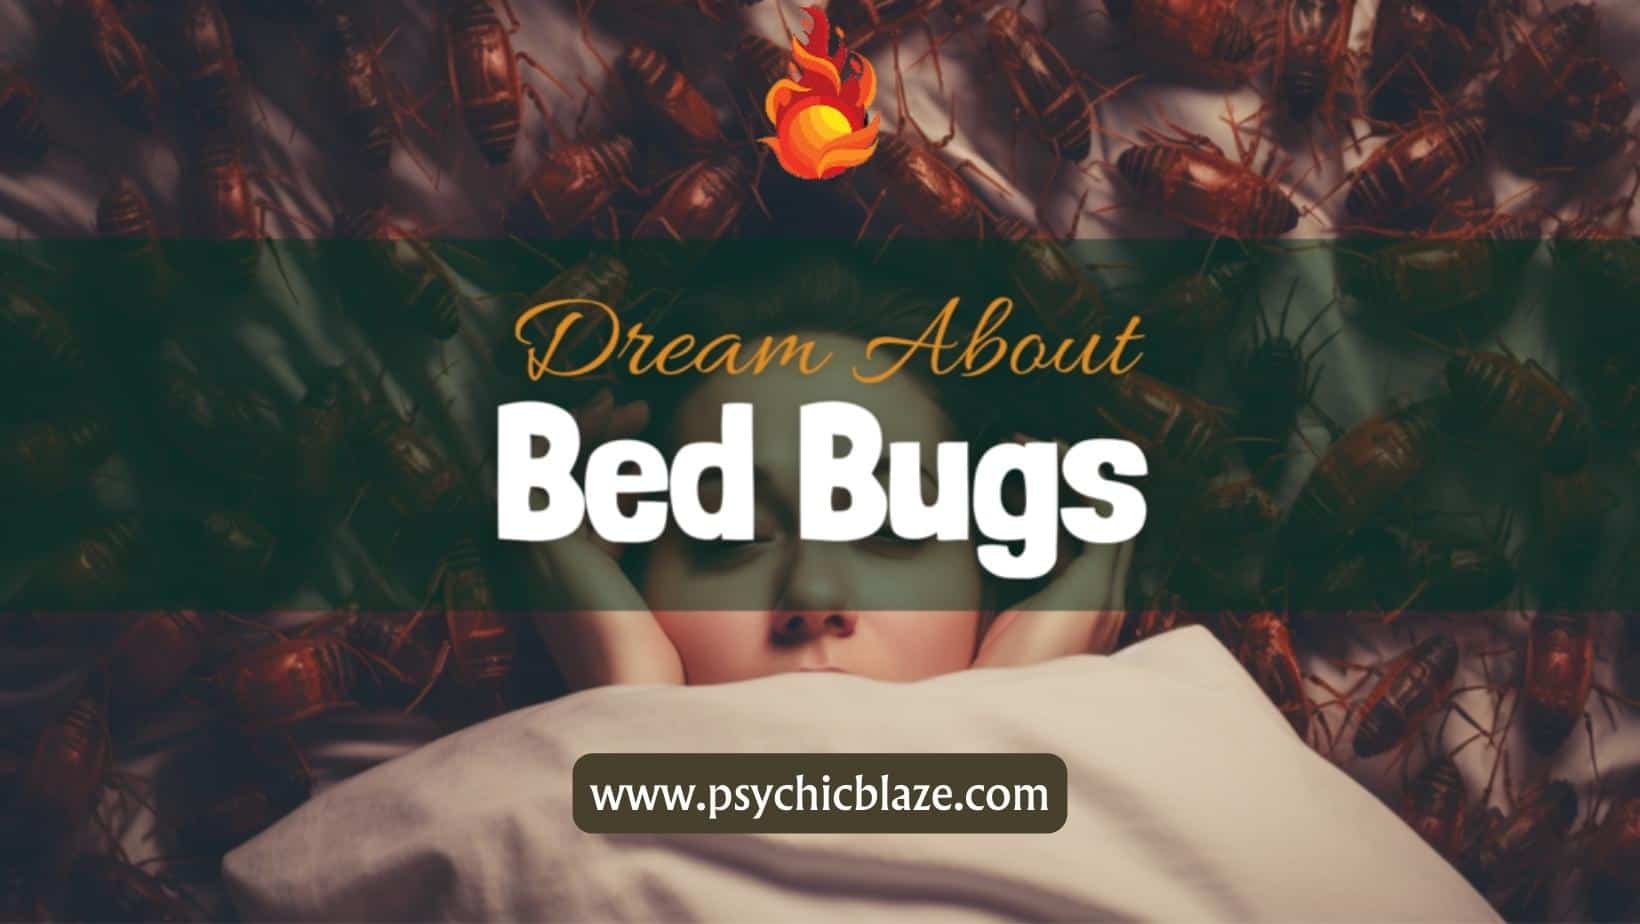 Dream about Bed Bugs